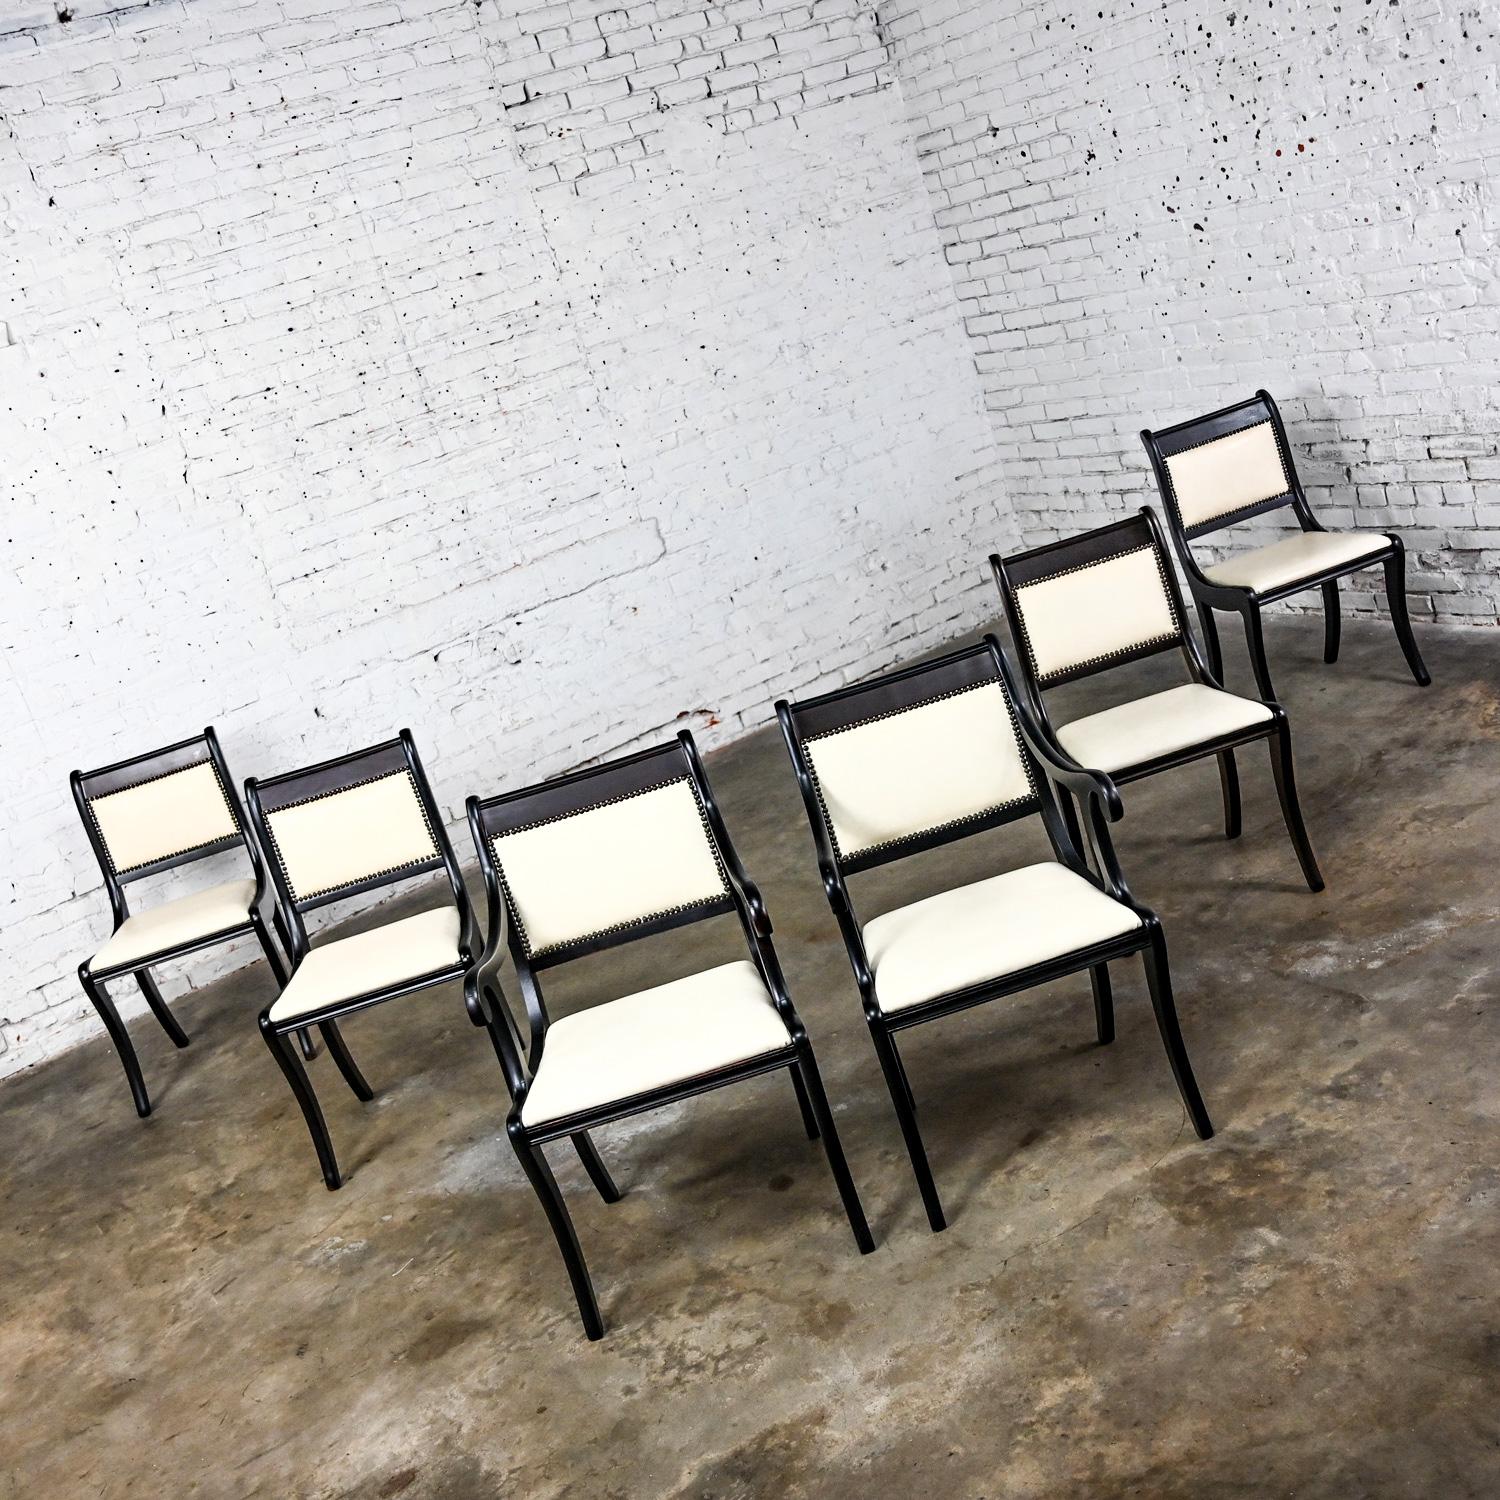 Gorgeous Mid Century Regency style dining chairs comprised of black dyed & distressed mahogany frames, off white vinyl or faux leather seats and backs with nail head details, 2 arm and 4 side chairs, set of 6. Beautiful condition, keeping in mind